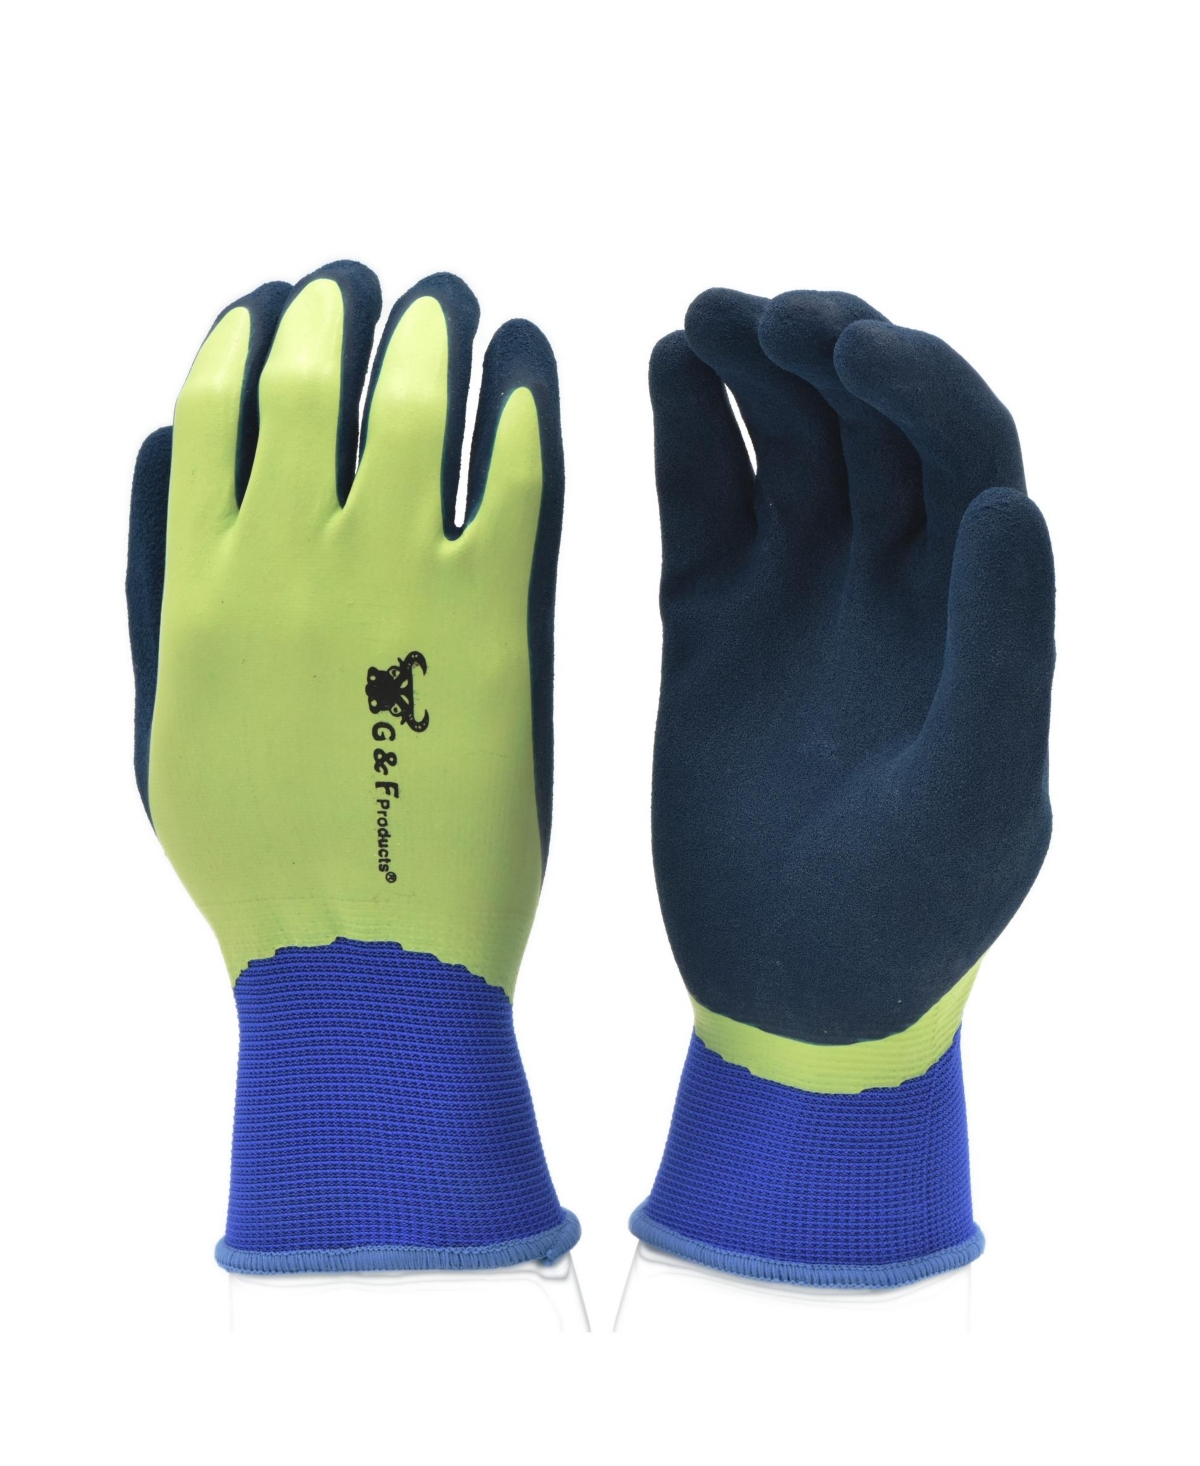 Men's Double Microfoam Latex Coated Gloves, 6 Pairs - Blue